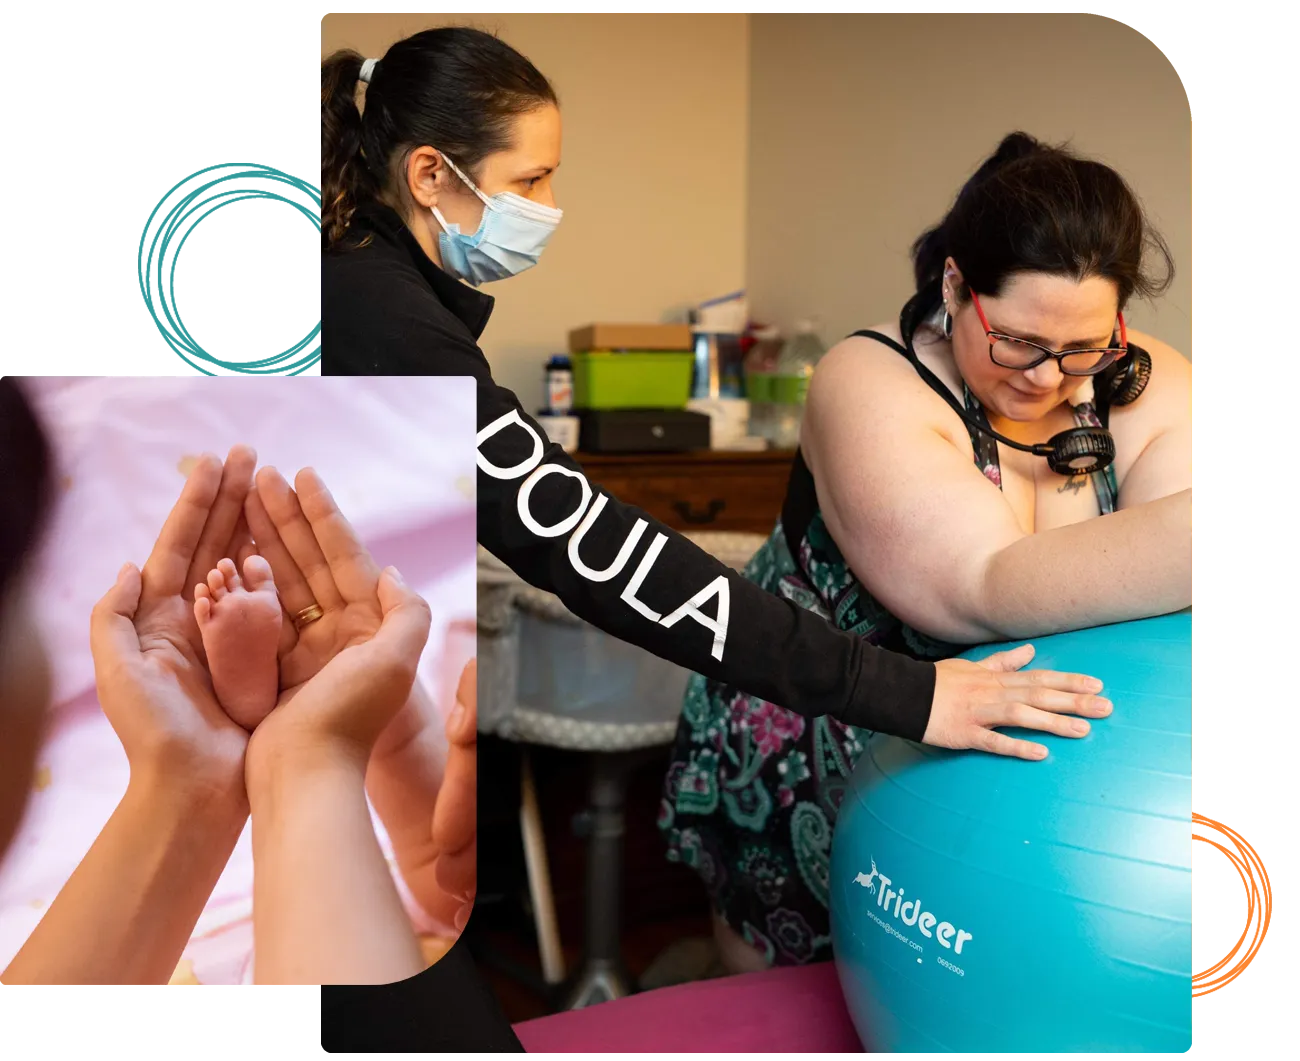 New World Doula Services - South Boston Area Doula Agency